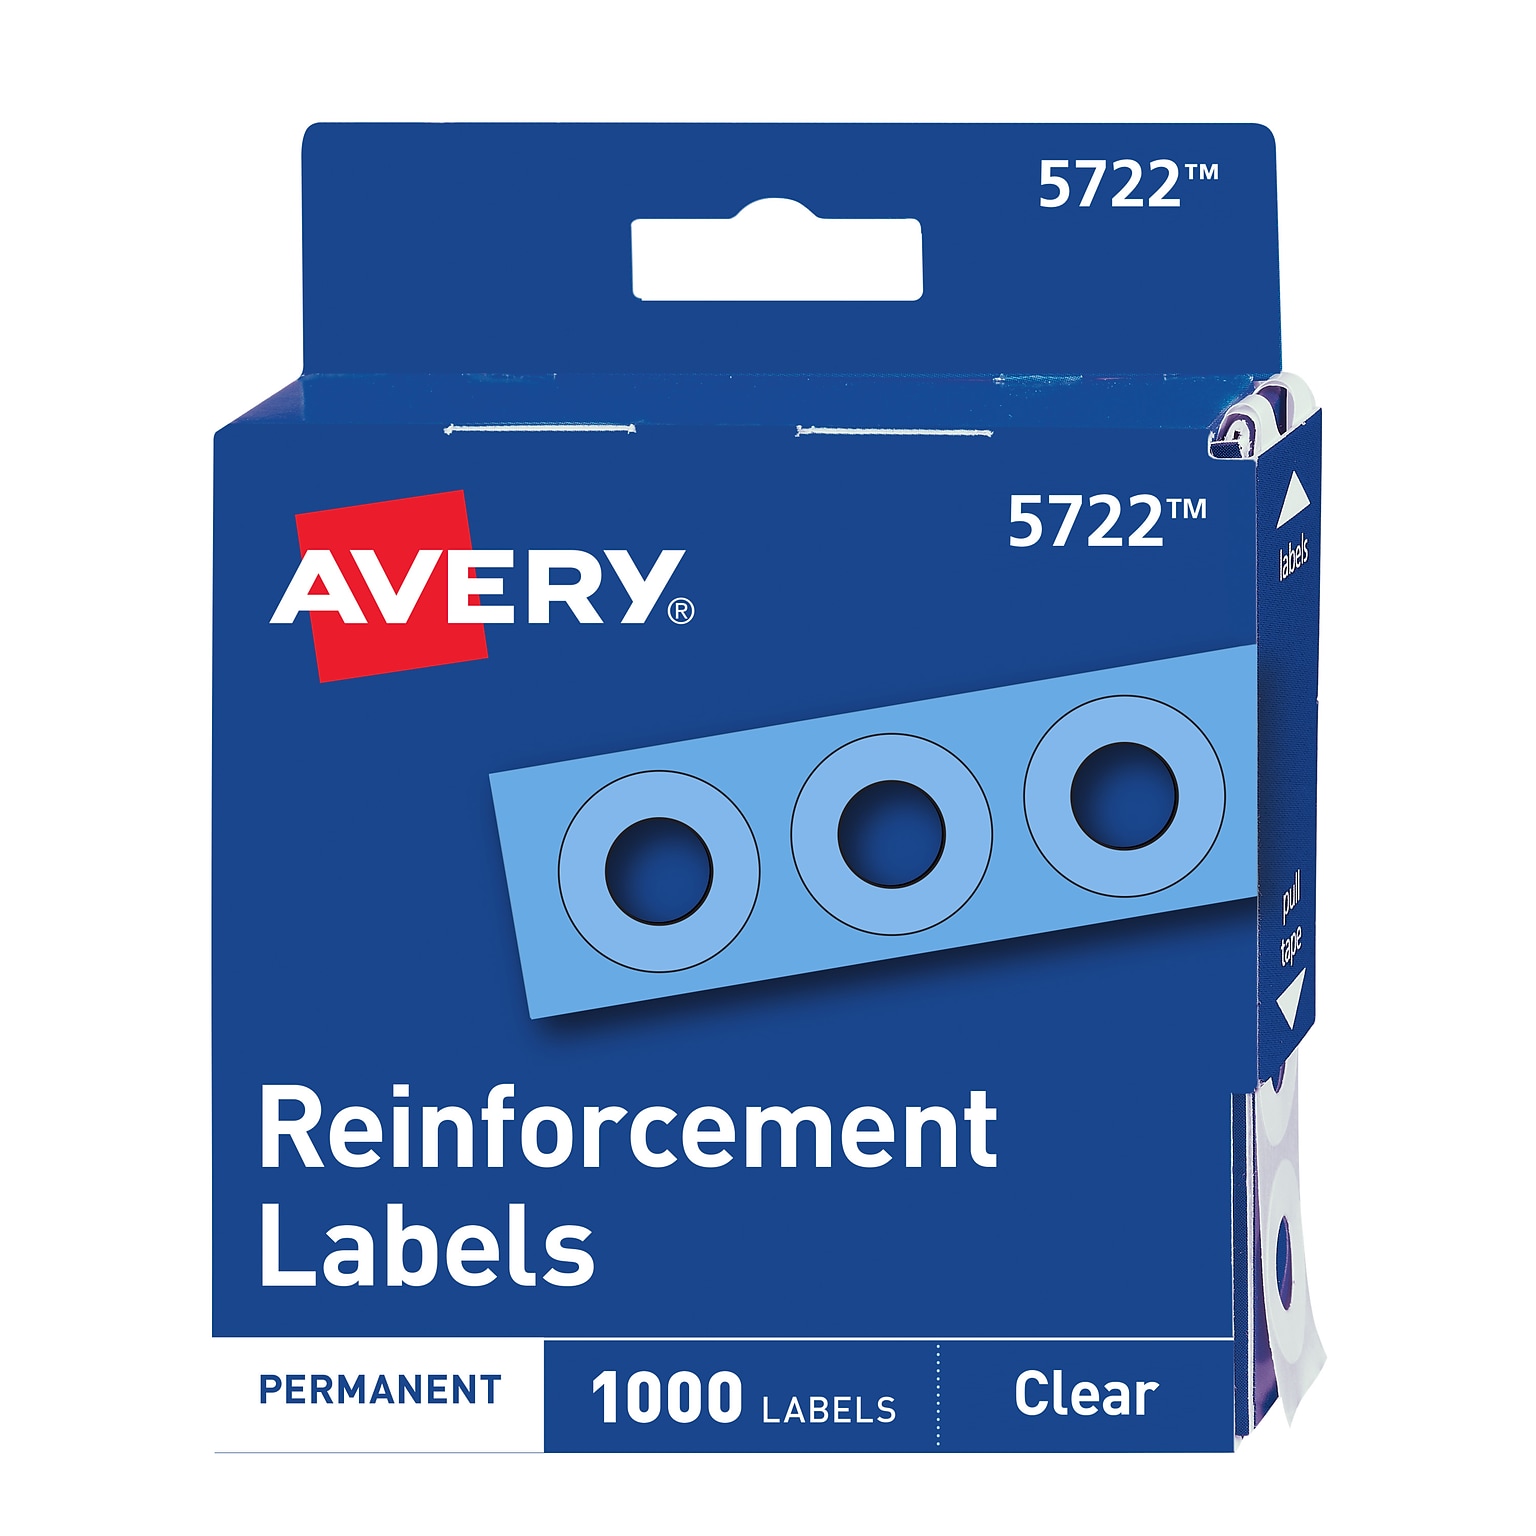 Avery Self-Adhesive Plastic Reinforcement Labels in Dispenser, 1/4 Diameter, Glossy Clear, 1000/Pack (5722)